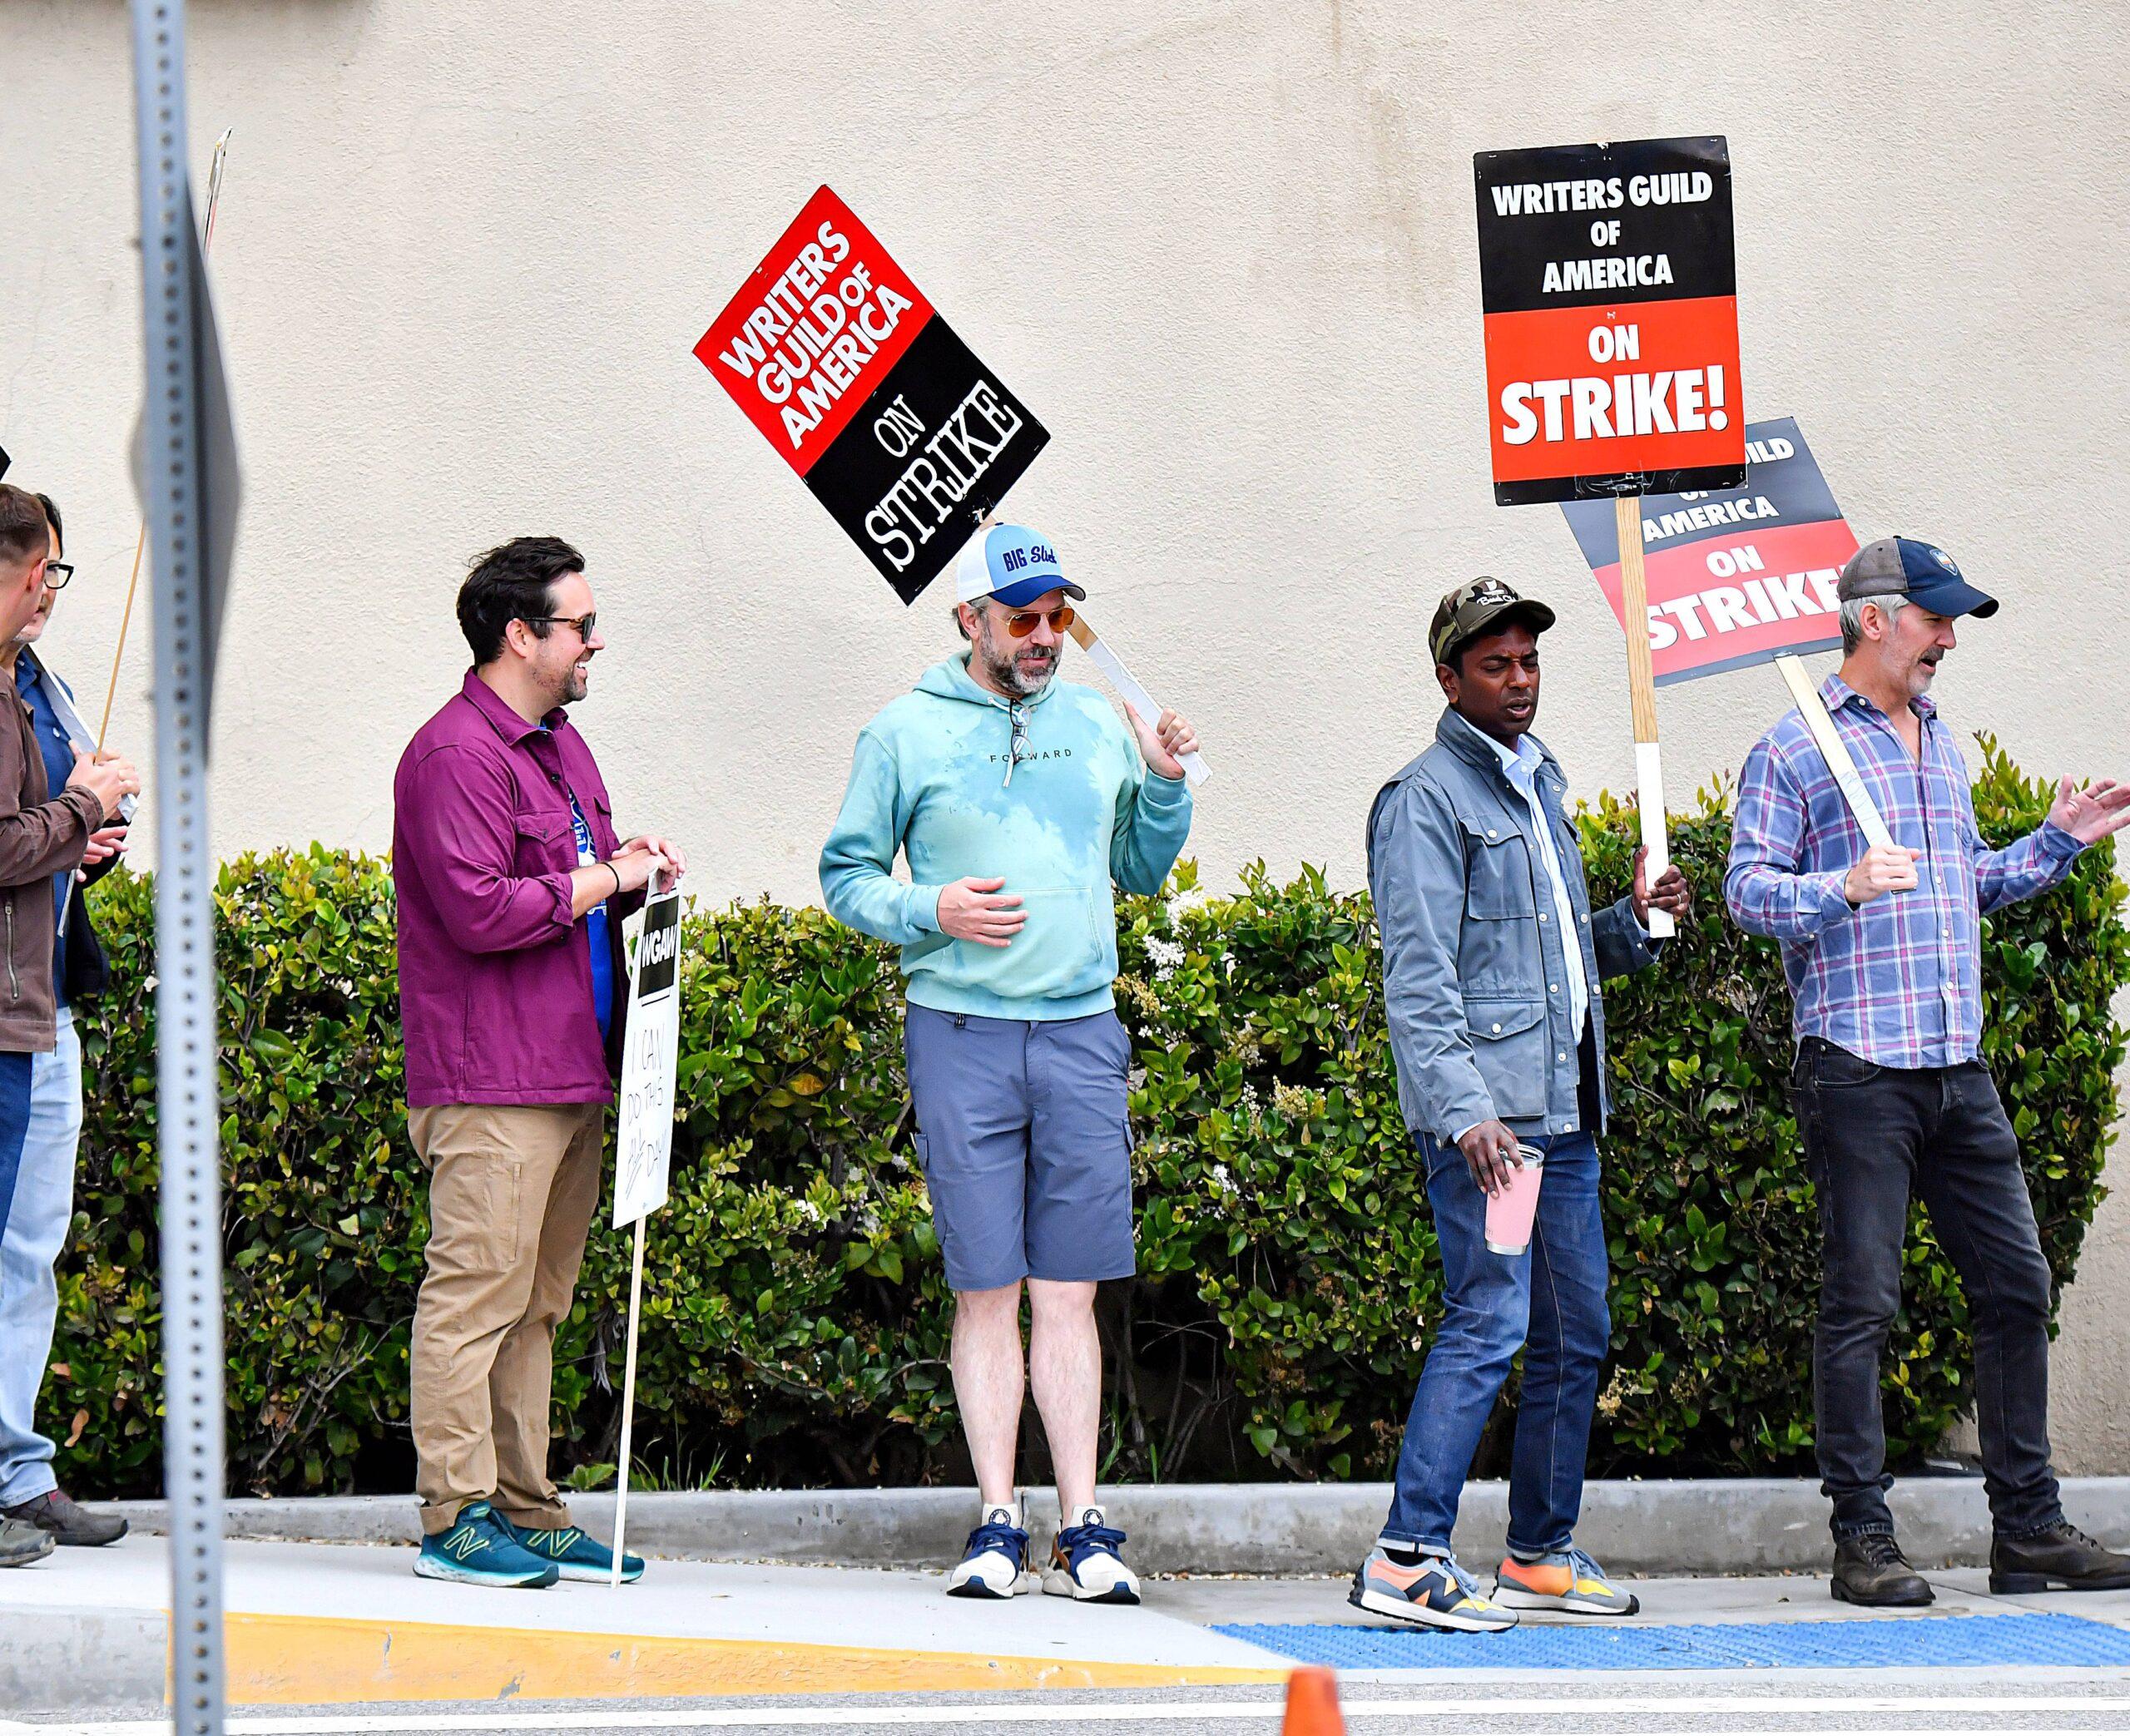 Jason Sudeikis Is All Smiles While Joining The Picket Line In Support Of The apos Writers Strike apos At The Warner Brother apos s Studios In Burbank CA